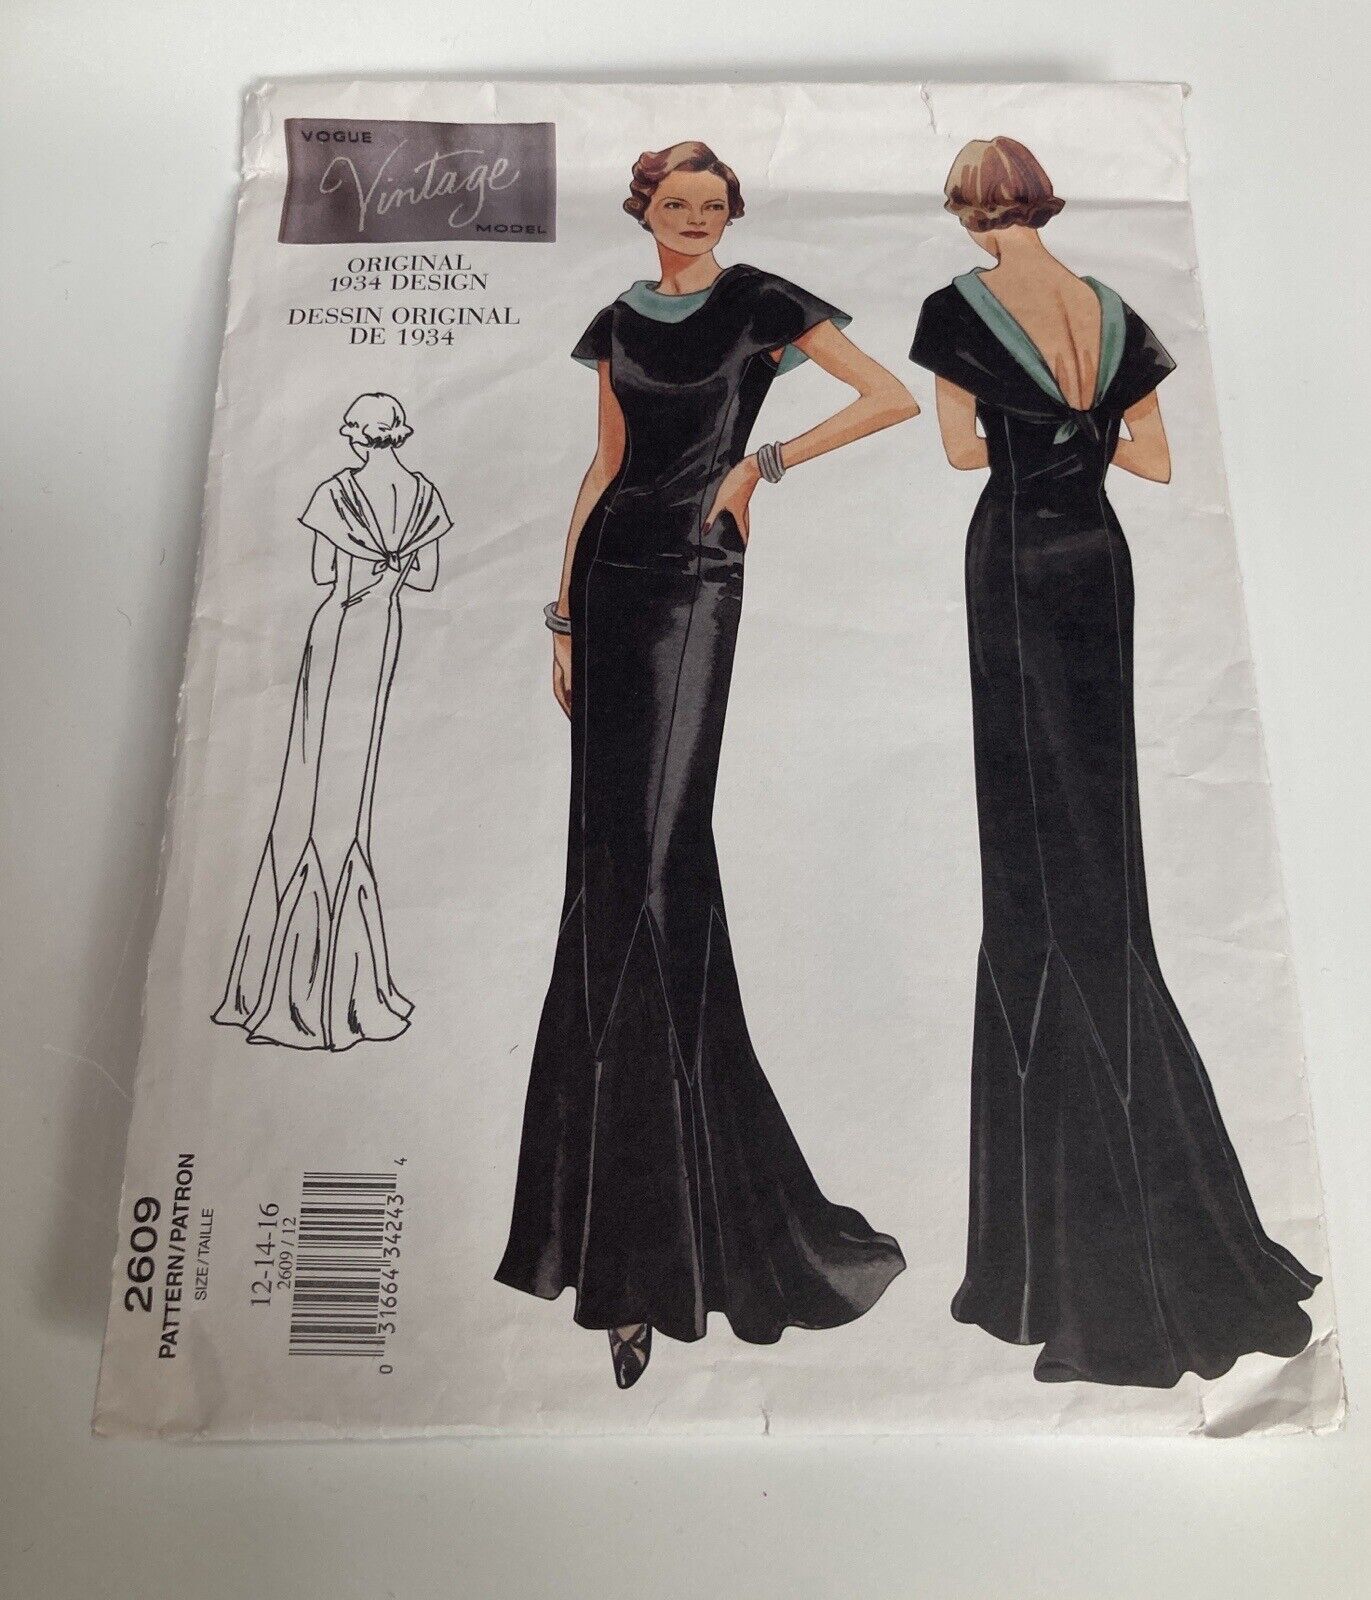 Vogue #2609 Vintage 1934 Designs Pattern Cut Size 14 GOWN WITH PLUNGING BACK